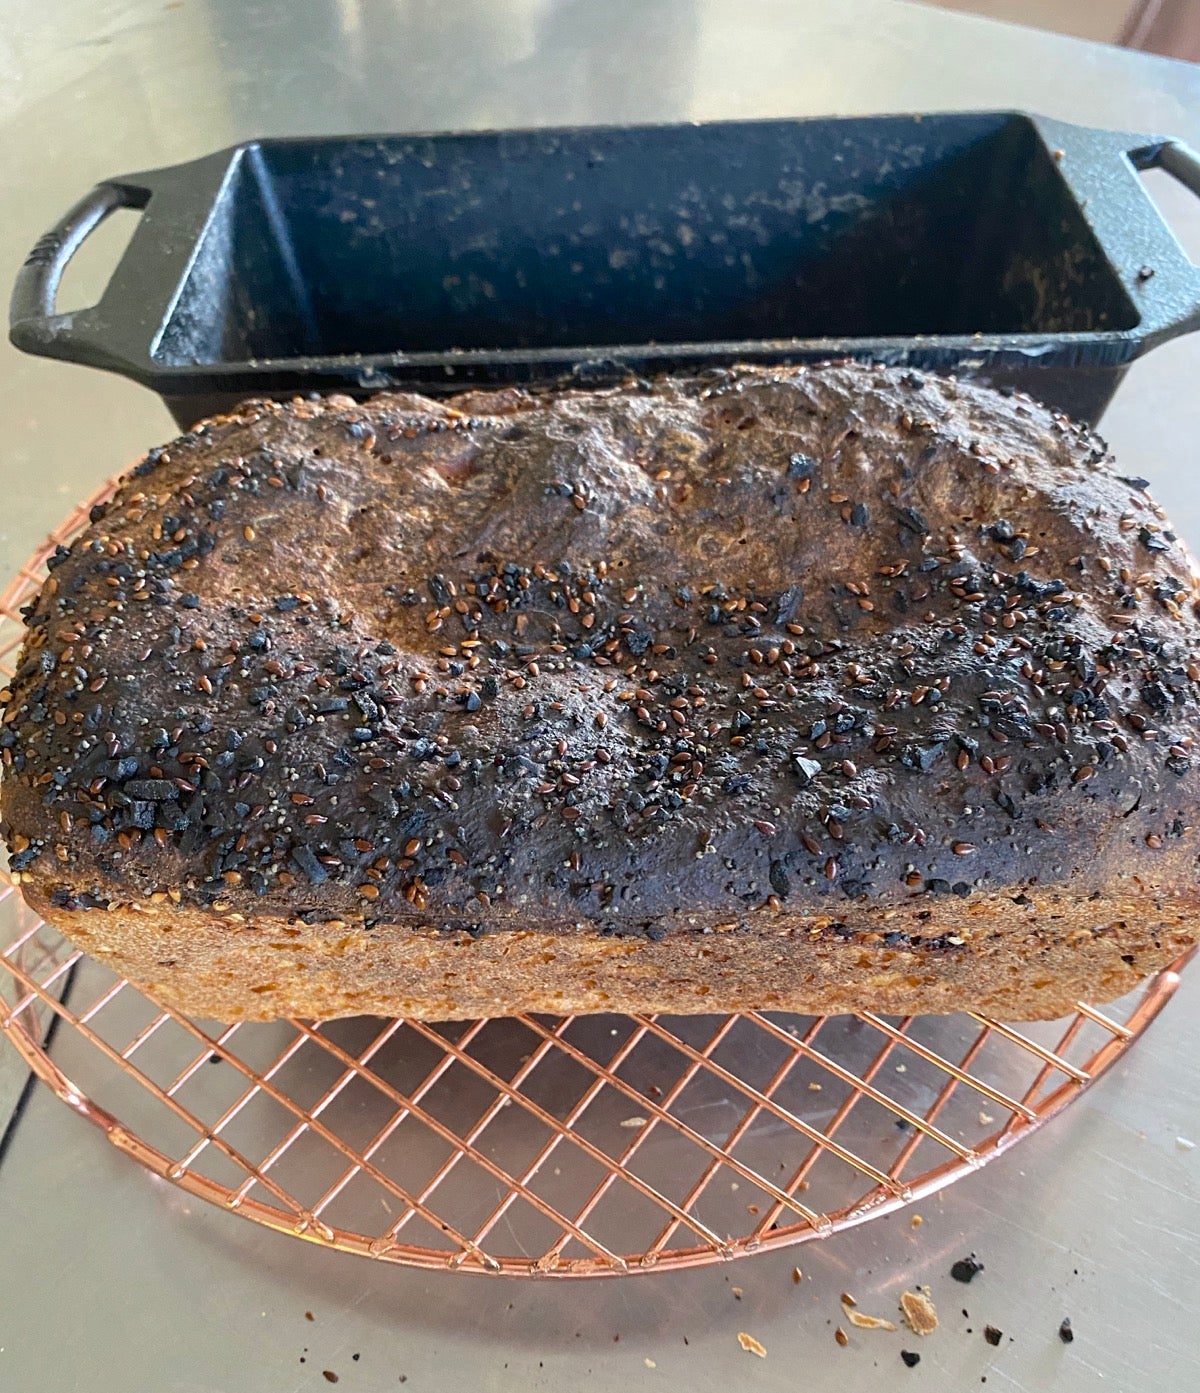 Loaf of bread burned on top in front of black cast iron loaf pan.